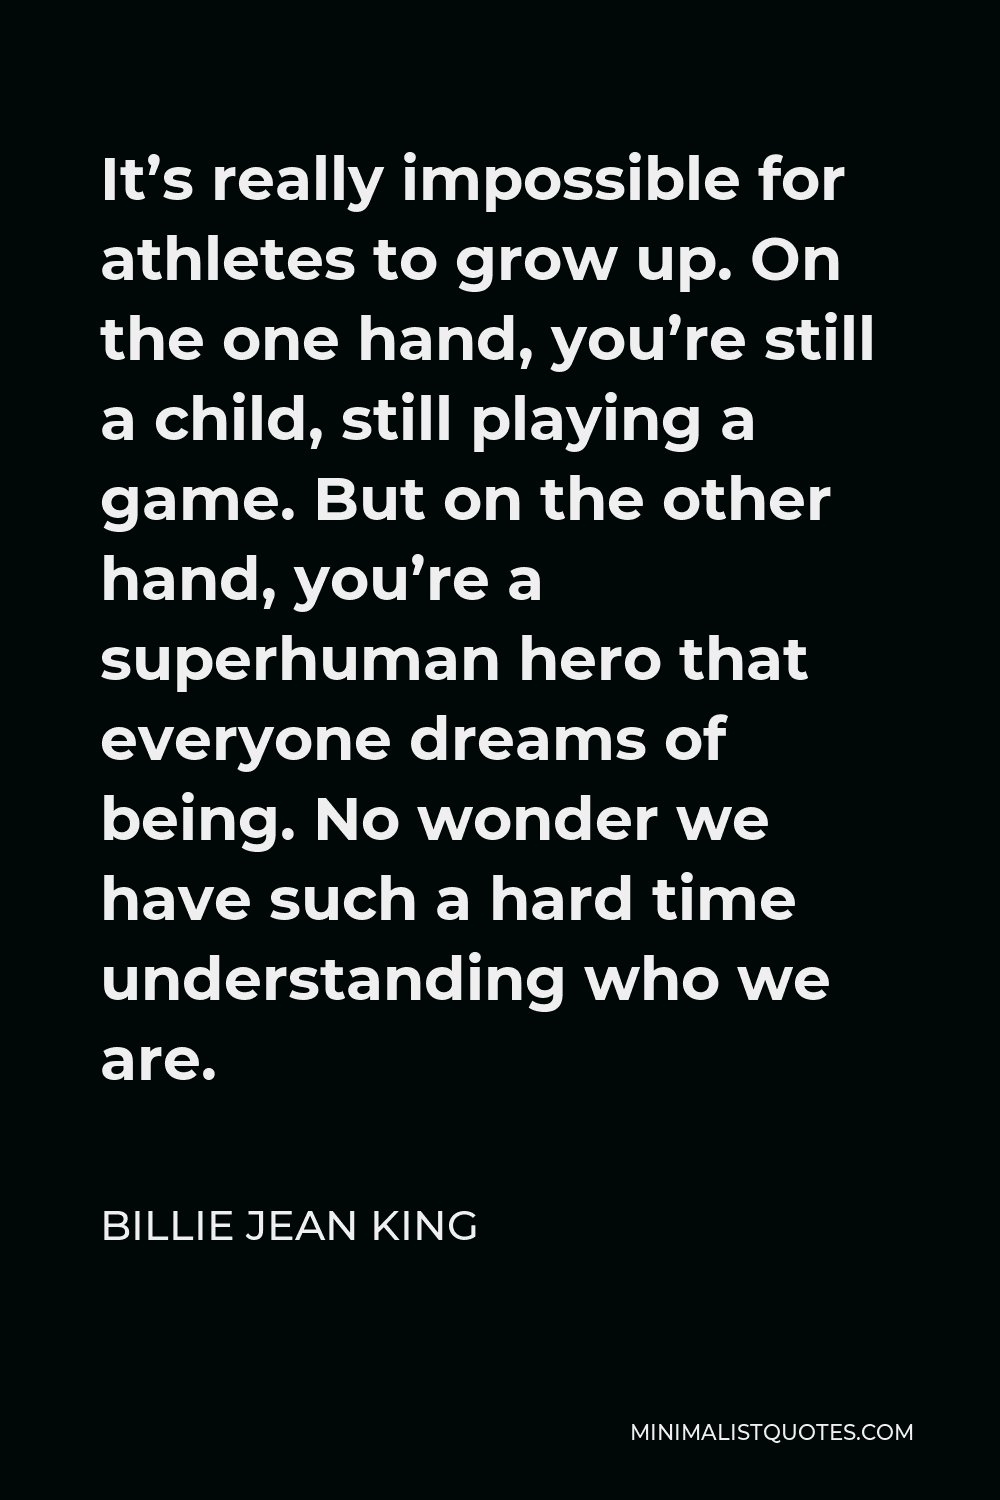 Billie Jean King Quote - It’s really impossible for athletes to grow up. On the one hand, you’re still a child, still playing a game. But on the other hand, you’re a superhuman hero that everyone dreams of being. No wonder we have such a hard time understanding who we are.